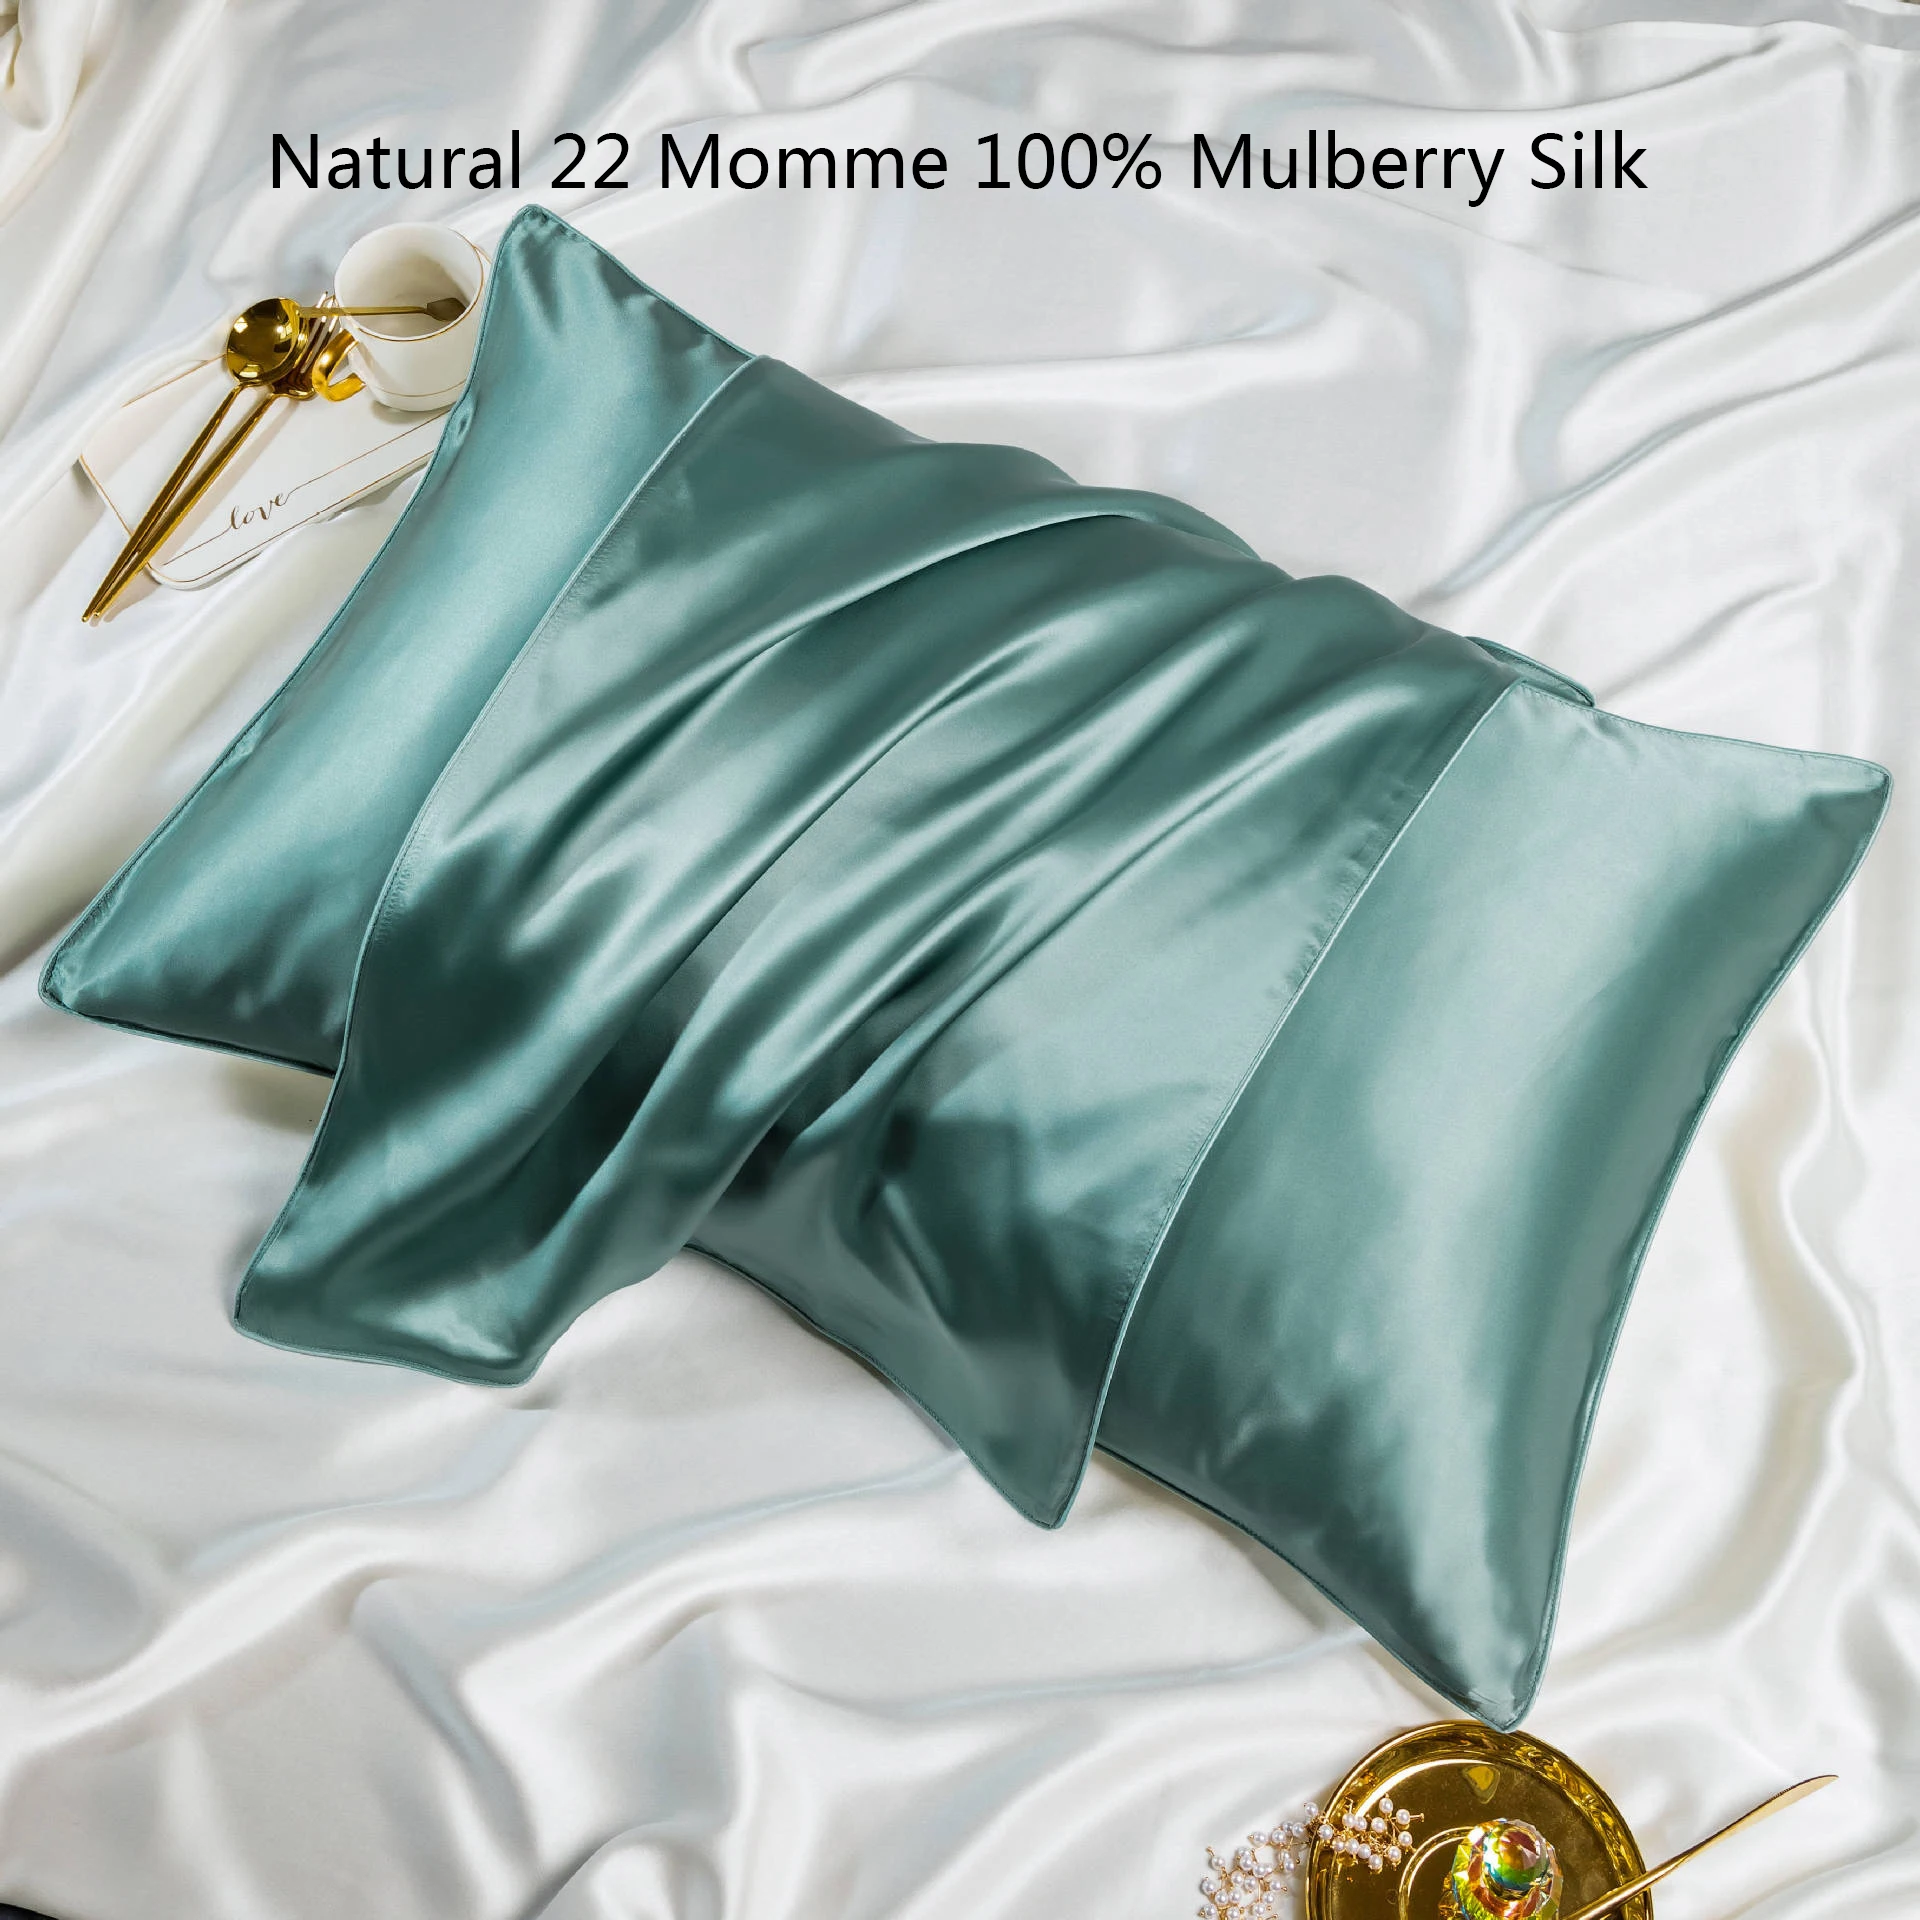 Natural 22 Momme 100% Mulberry Silk pillowcase Natural Mulberry Pillow Case 48x74cm